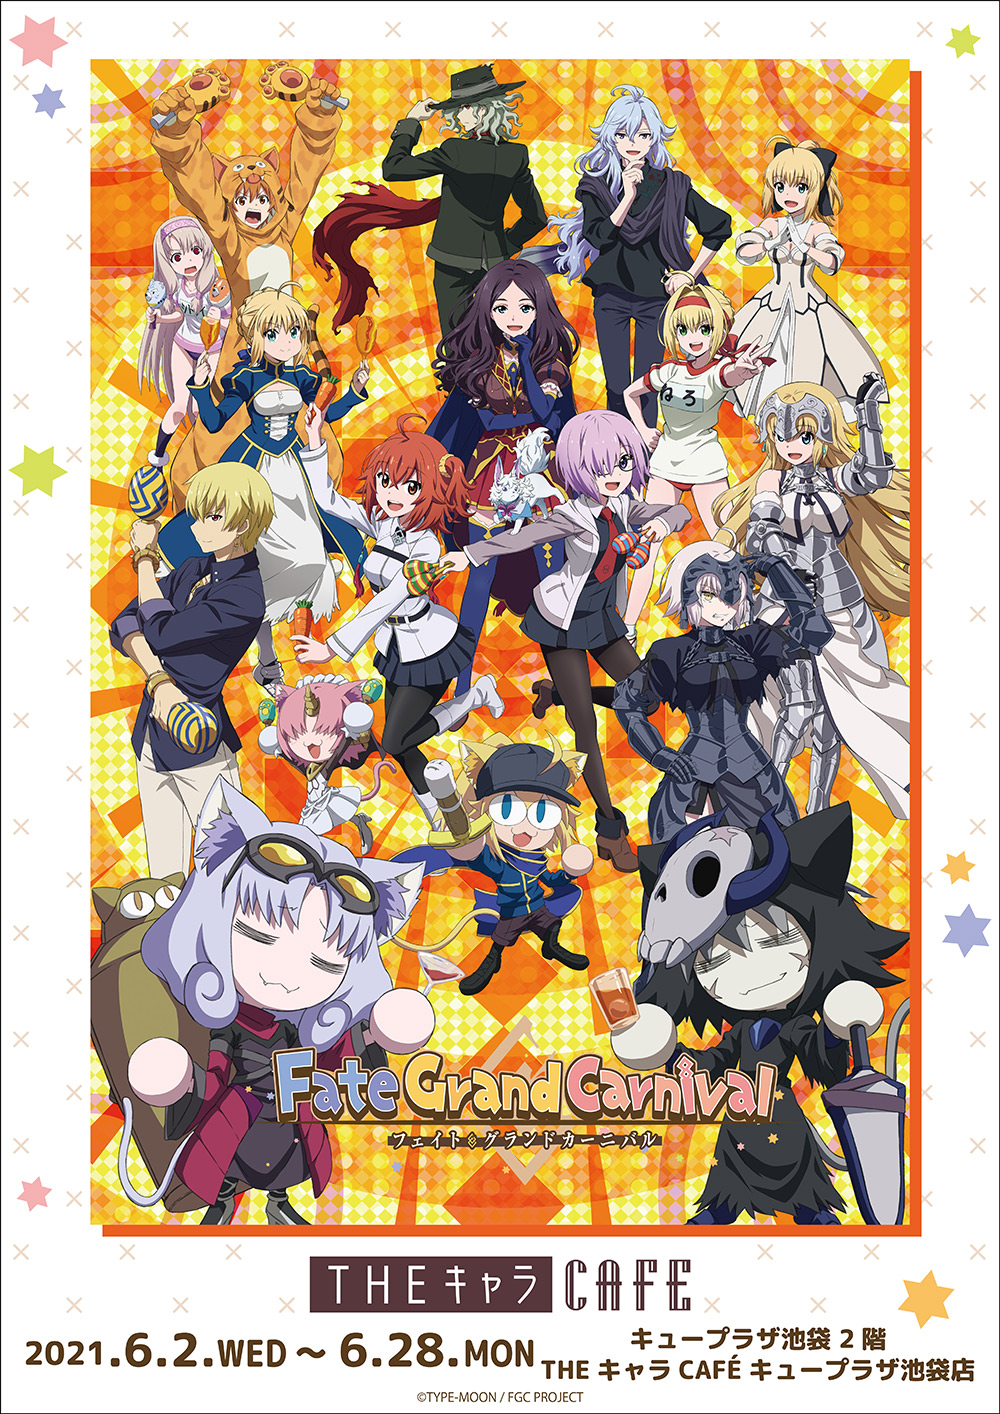 Fate Grand Carnival Theキャラcafe Theキャラ イベント情報